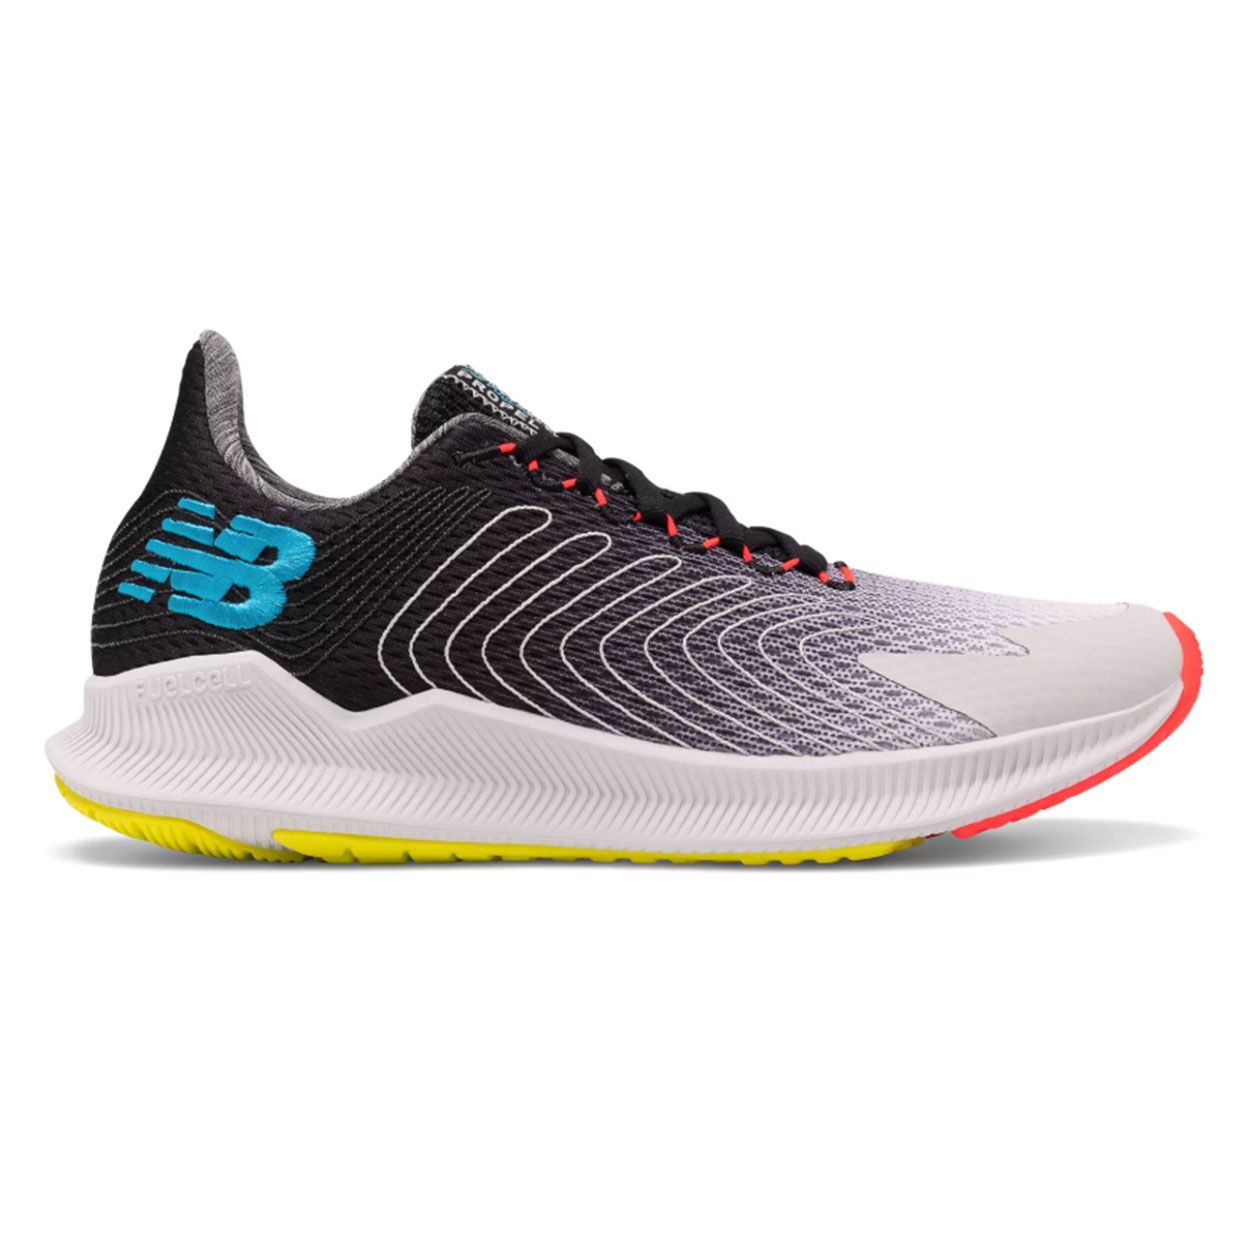 5. Best Support Sneakers for Tempo Runs: New Balance FuelCell Propel